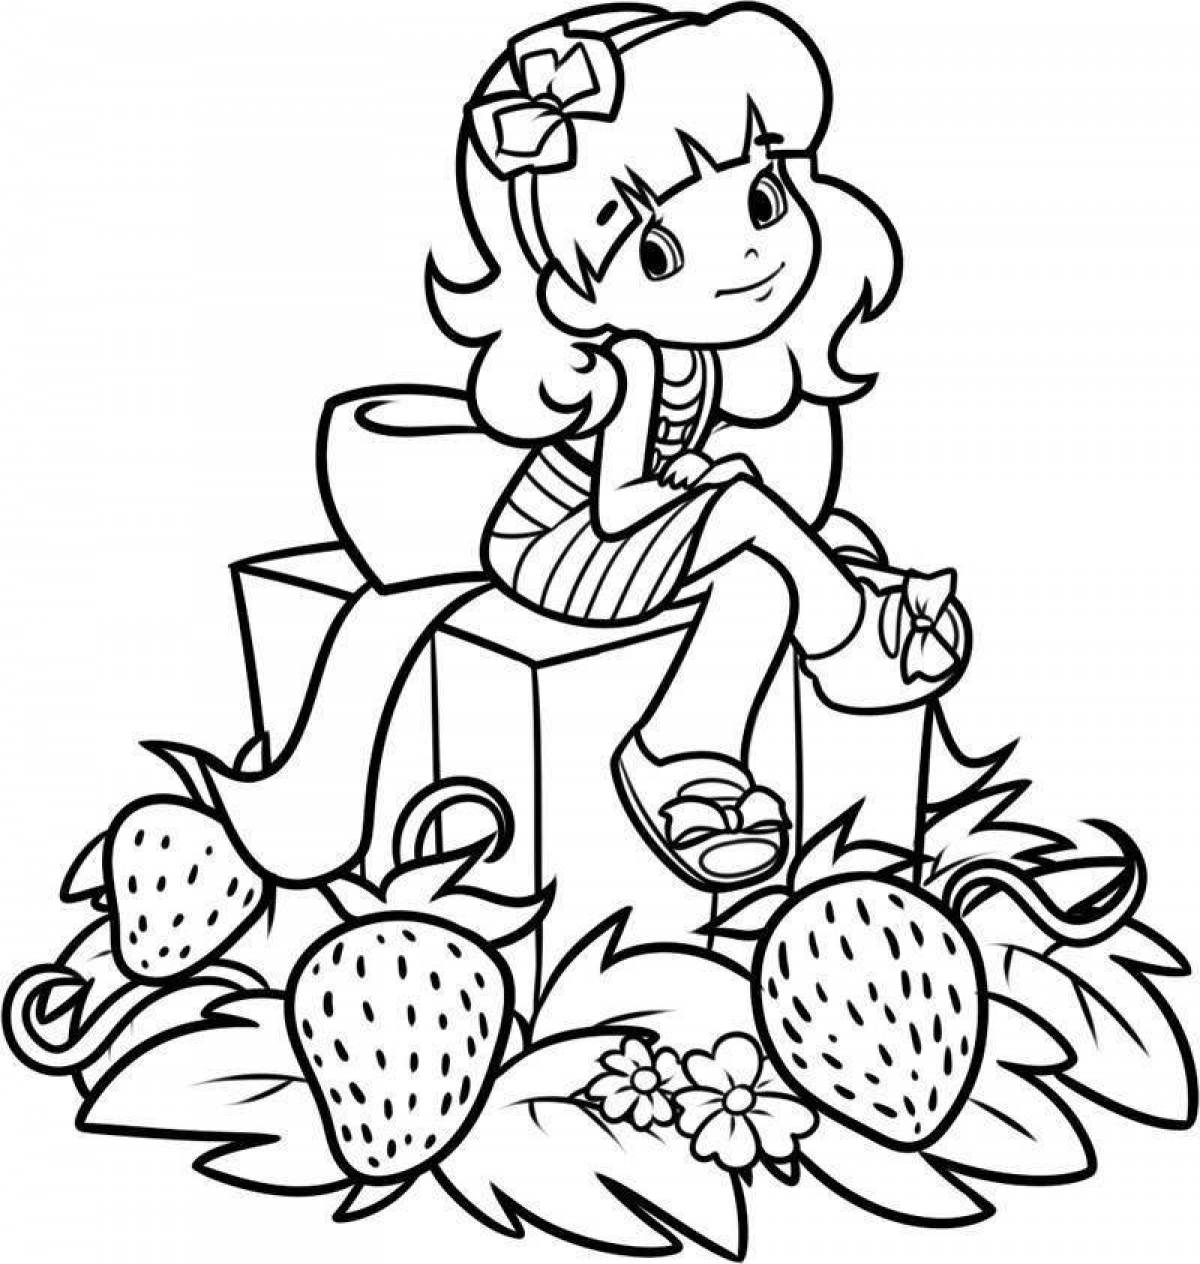 Coloring pages for girls 5-7 years old